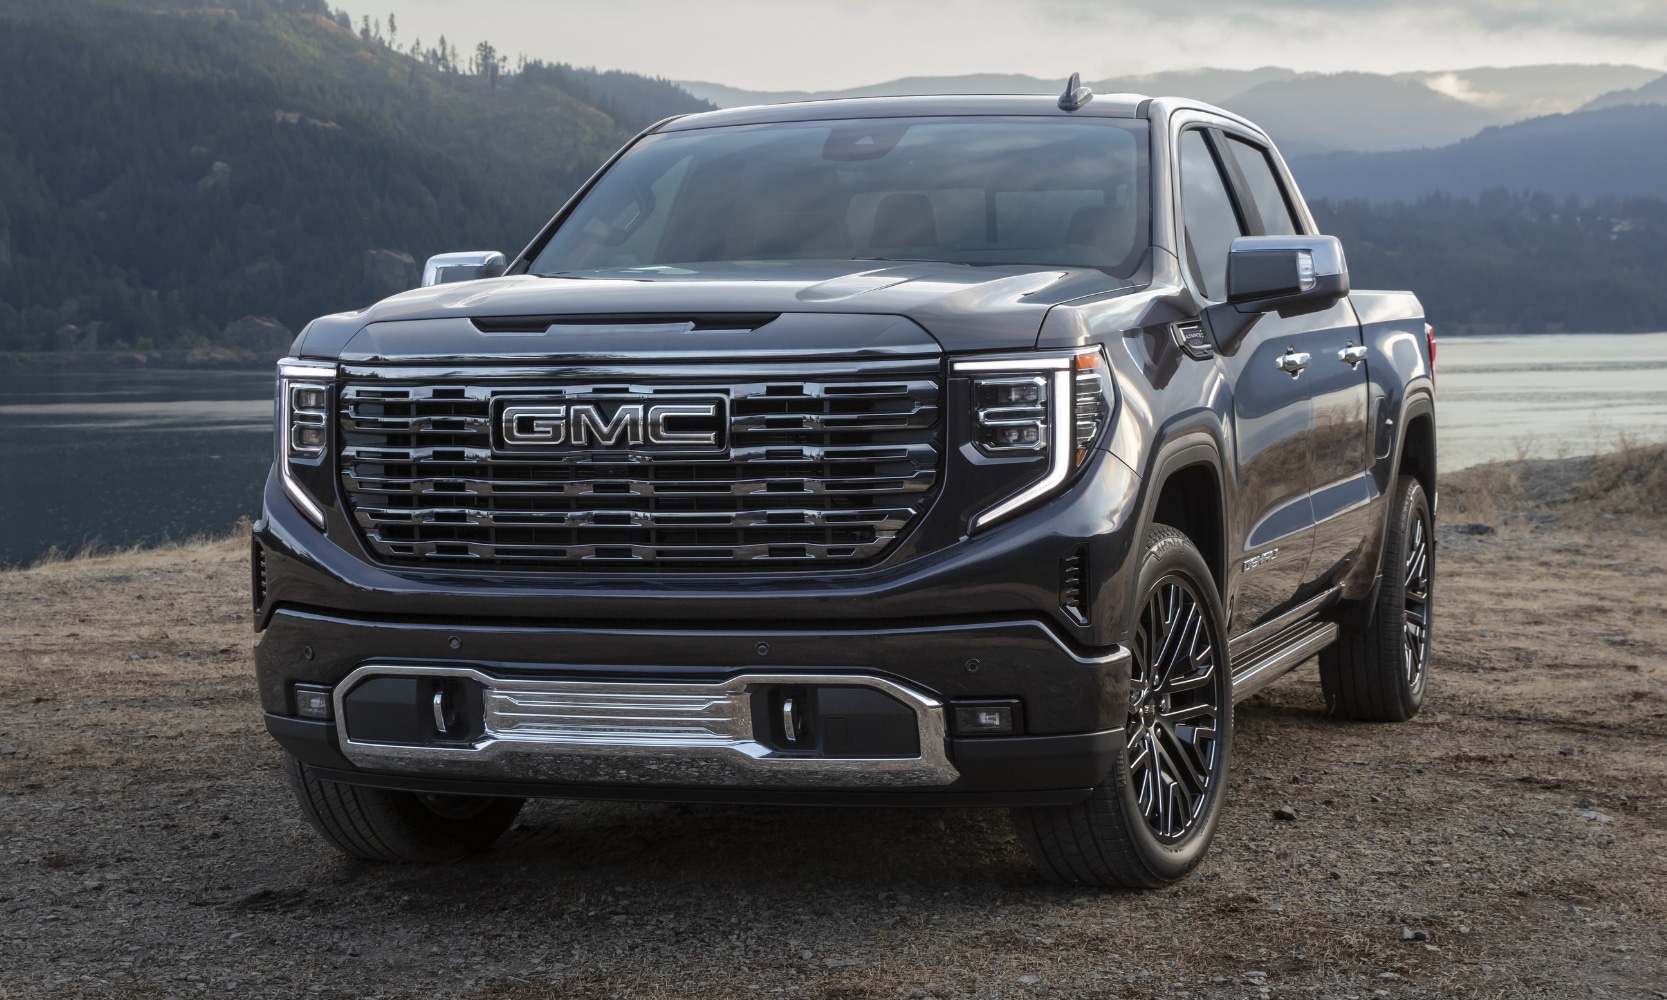 A look at the new 2022 GMC Sierra 1500 Light Duty Truck in the Ultimate Denali package